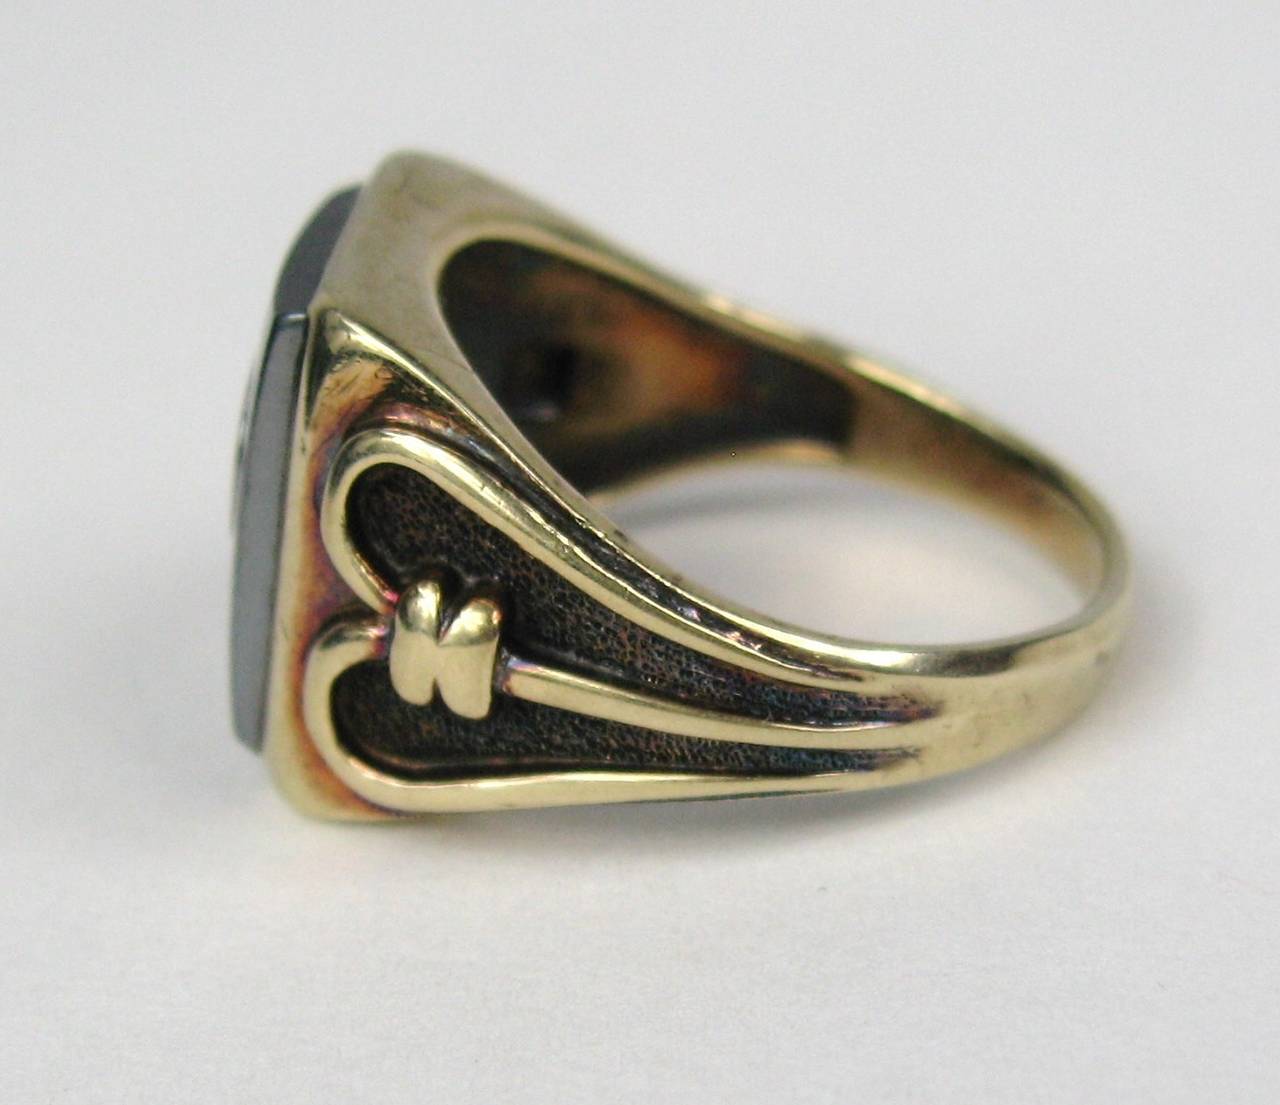 14K Yellow Gold Hematite Intaglio Carved Warrior's Head Men's Ring. Size 10.5. This Can be sized by us or your Jeweler. This is out of a massive collection of Hopi, Zuni, Navajo, Southwestern, sterling silver, (costume jewelry that was not worn) 